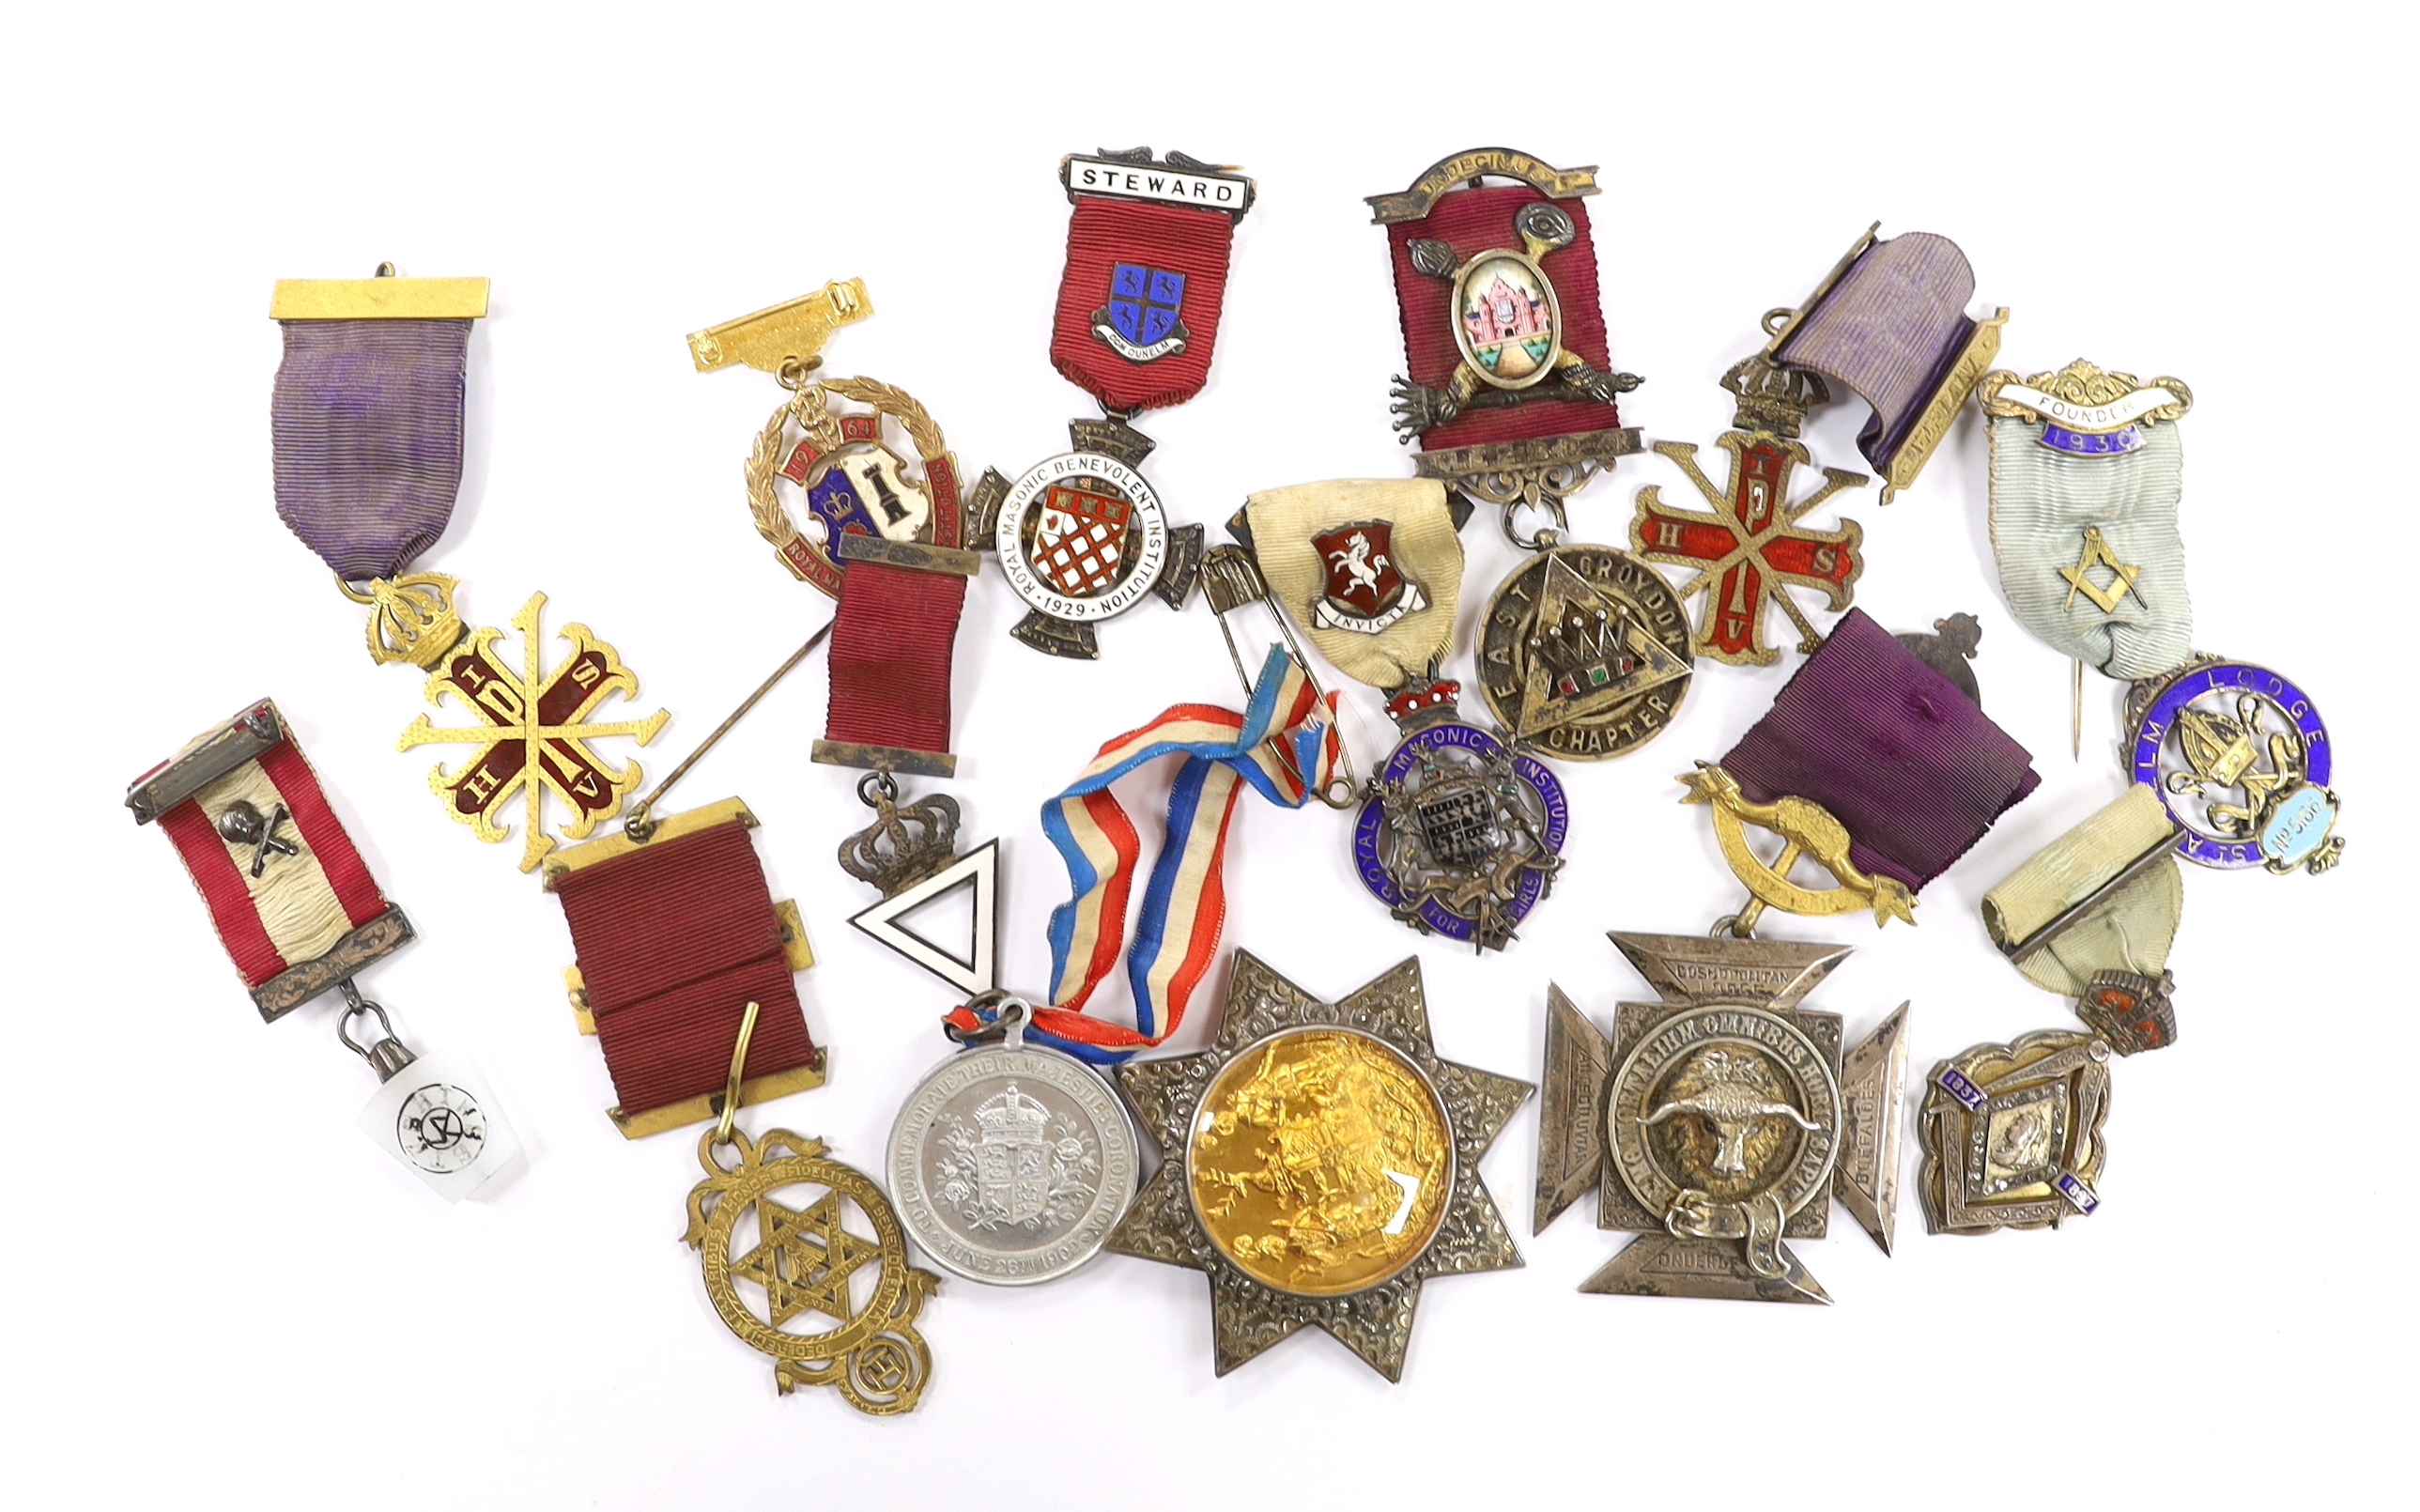 Fourteen Masonic and Order of Buffaloes medals, including enamelled examples, named lodges and silver hallmarked examples                                                                                                   